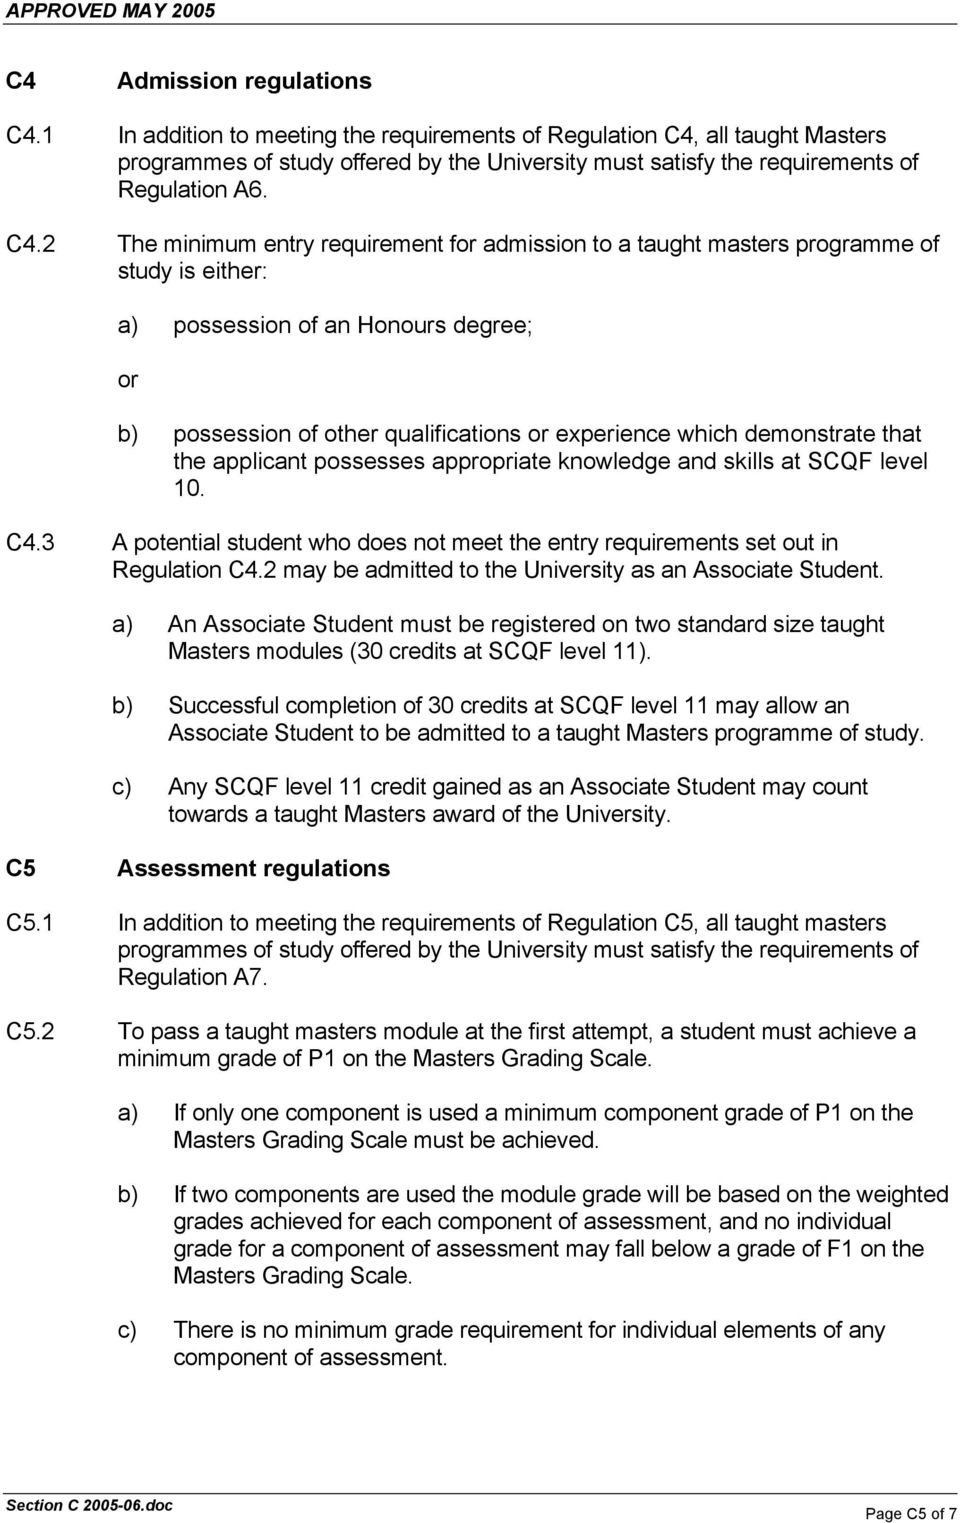 that the applicant possesses appropriate knowledge and skills at SCQF level 10. C4.3 A potential student who does not meet the entry requirements set out in Regulation C4.